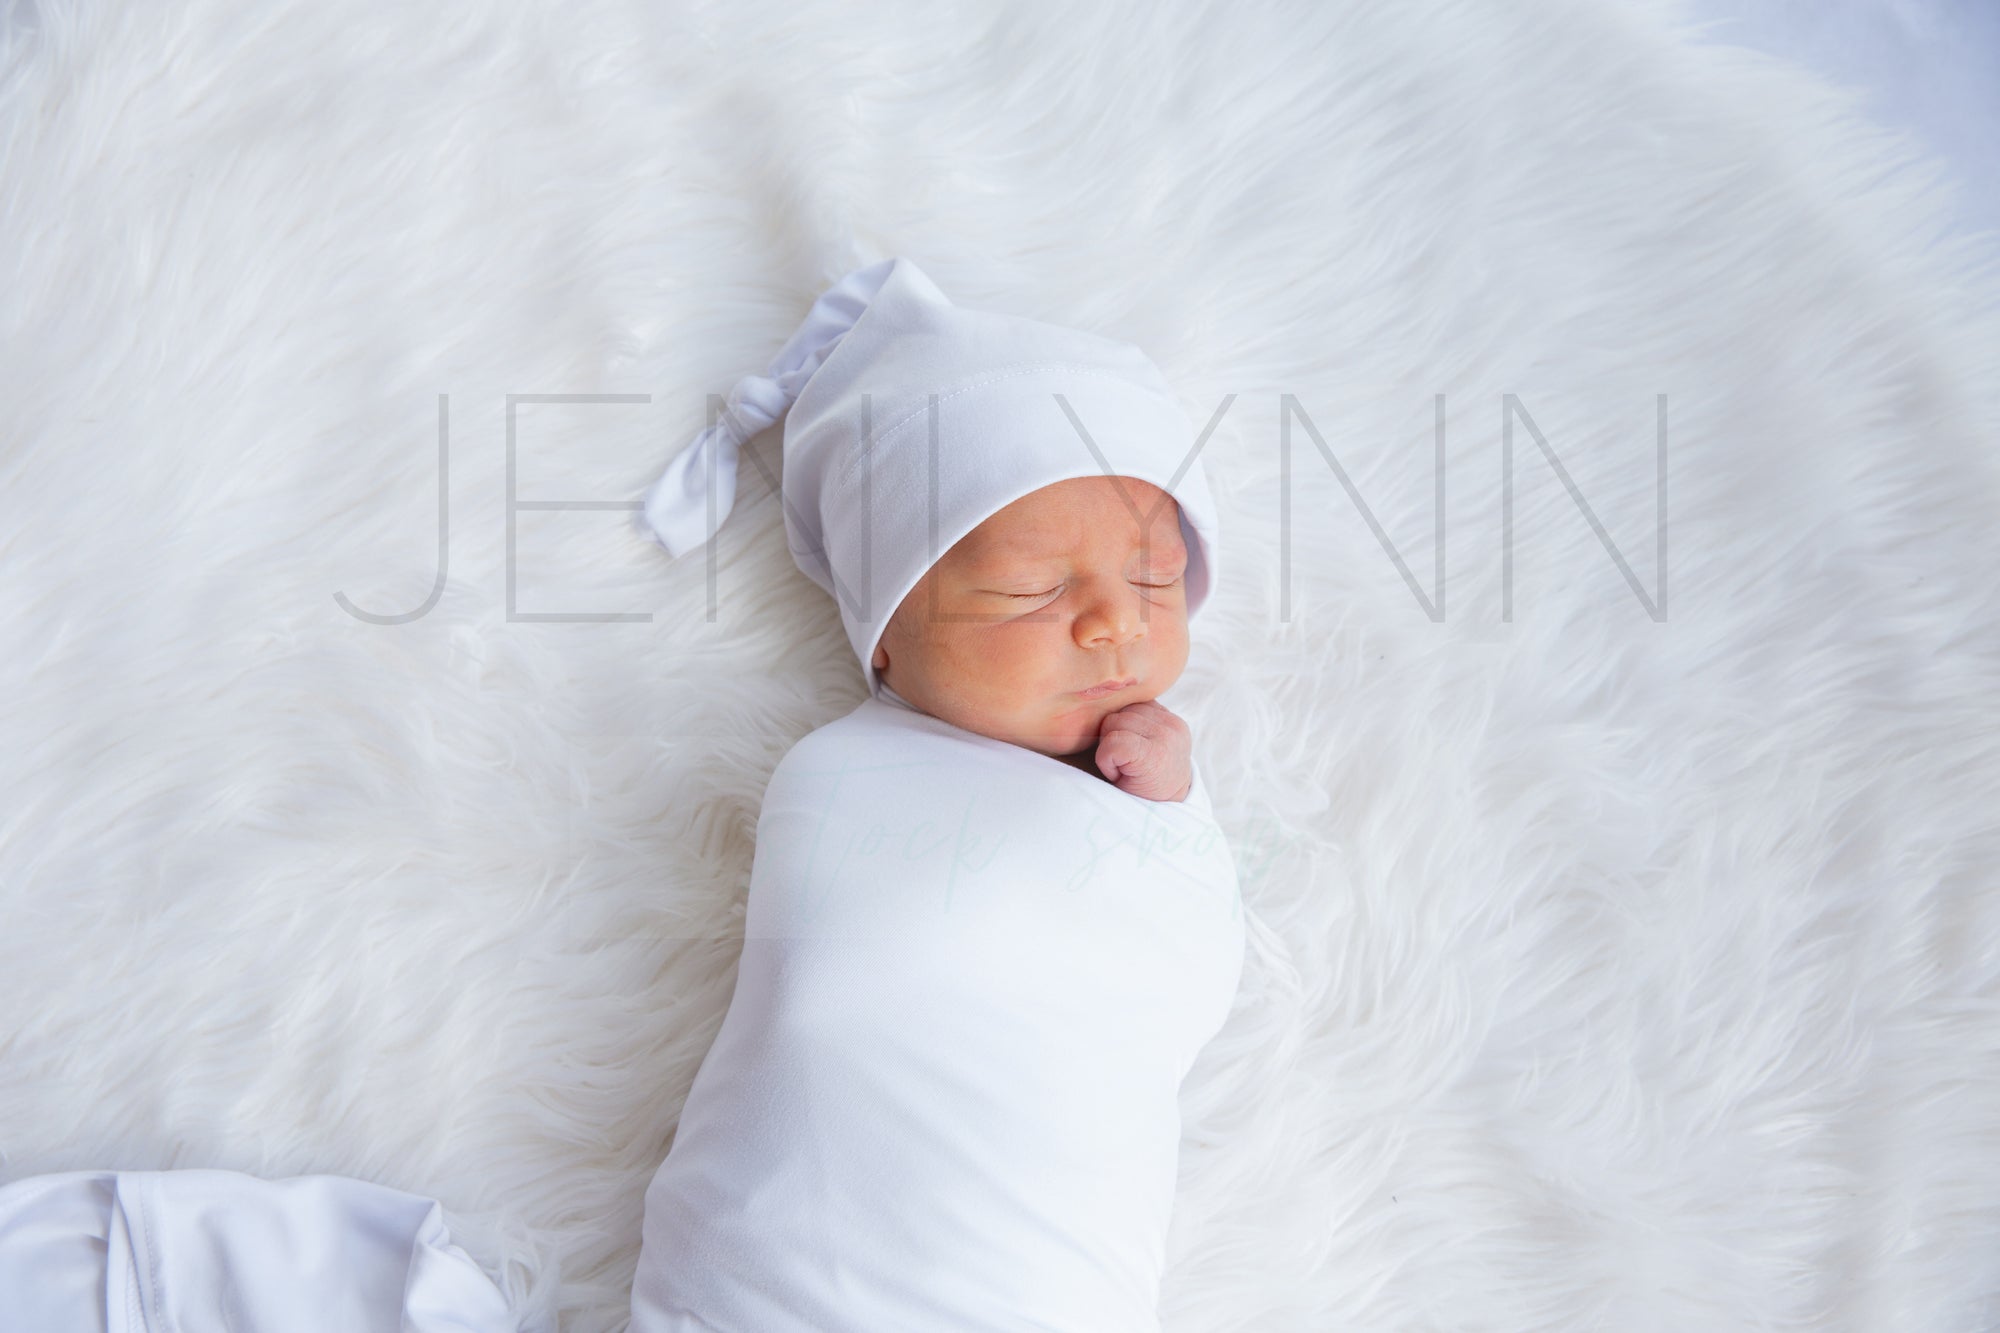 Stretch Jersey Blanket with knotted hat on baby Mockup #JZ16 PSD